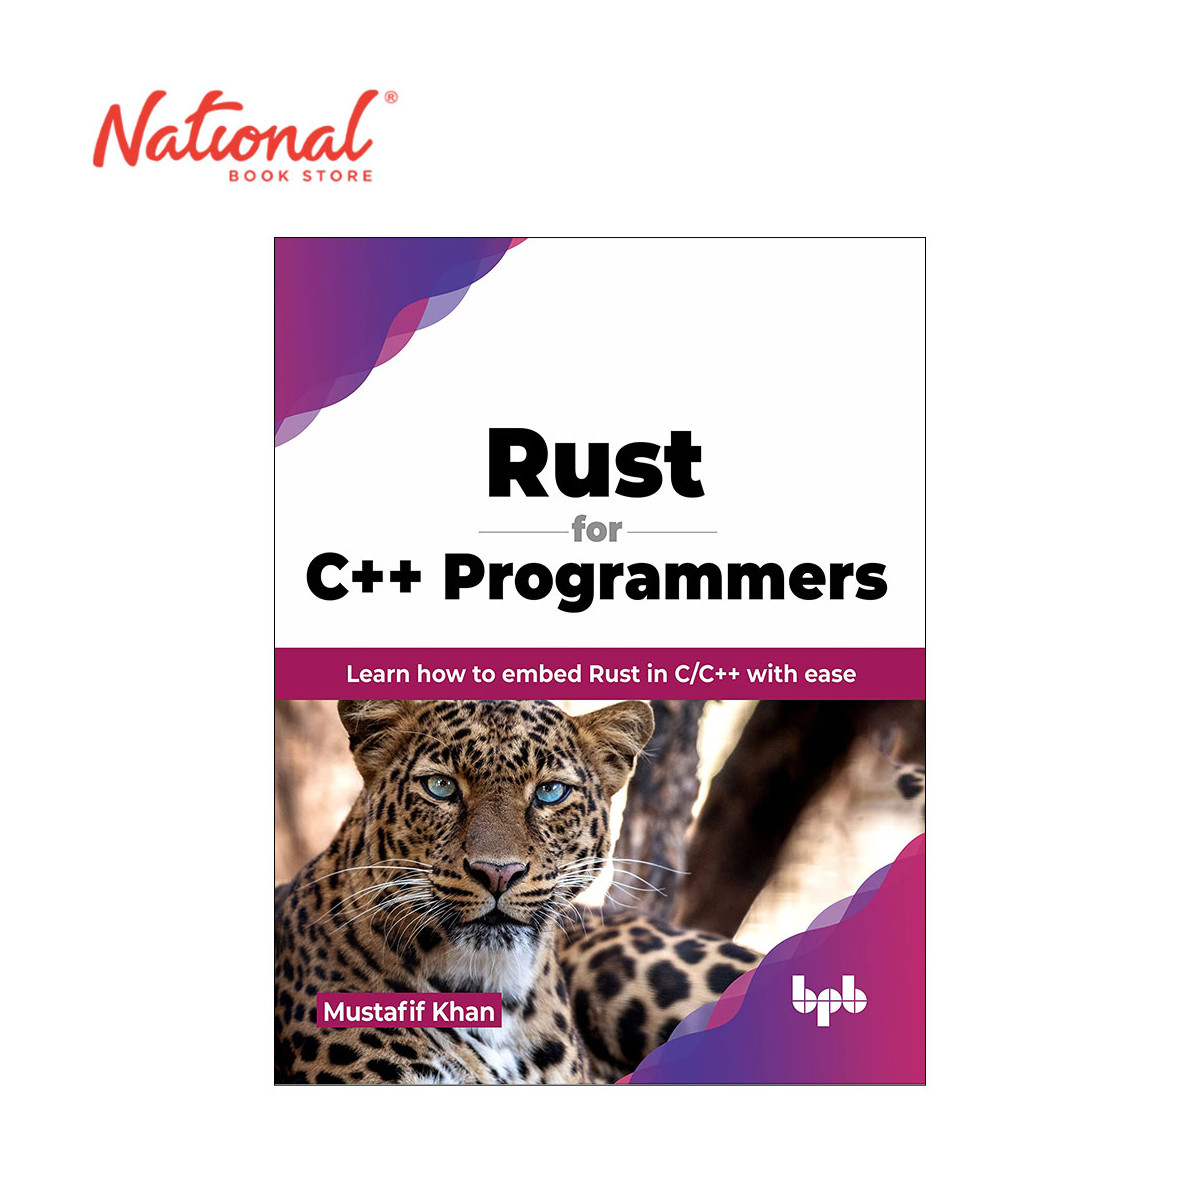 Rust for C++ Programmers by Mustafif Khan - Trade Paperback - Computer Books